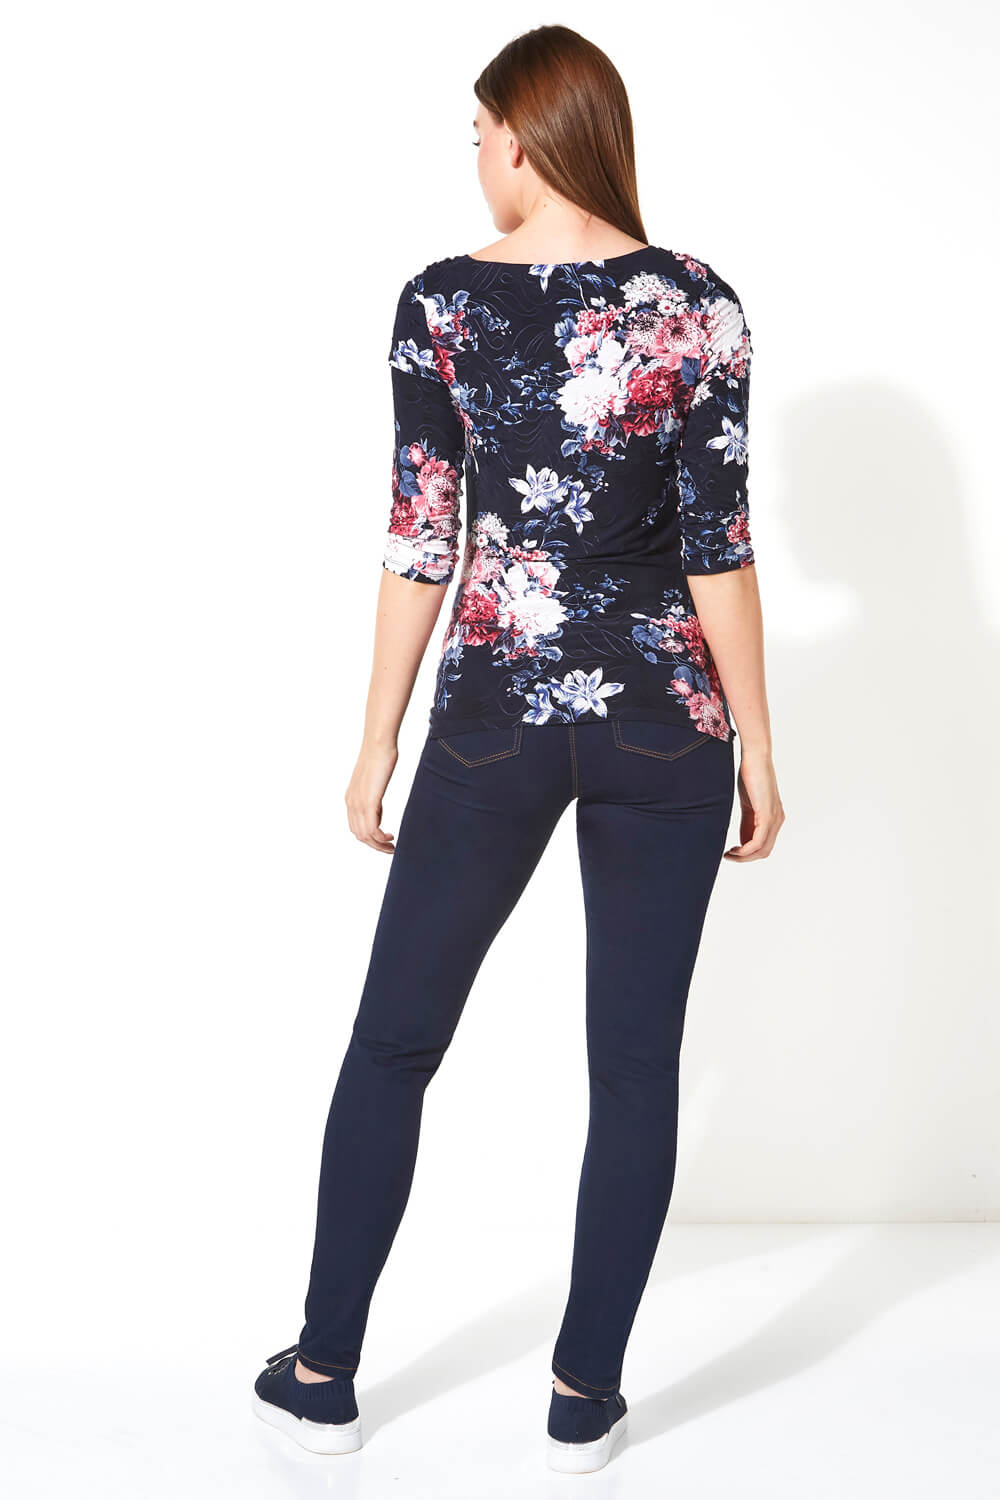 Navy  Floral Print Cowl Neck Top, Image 3 of 3